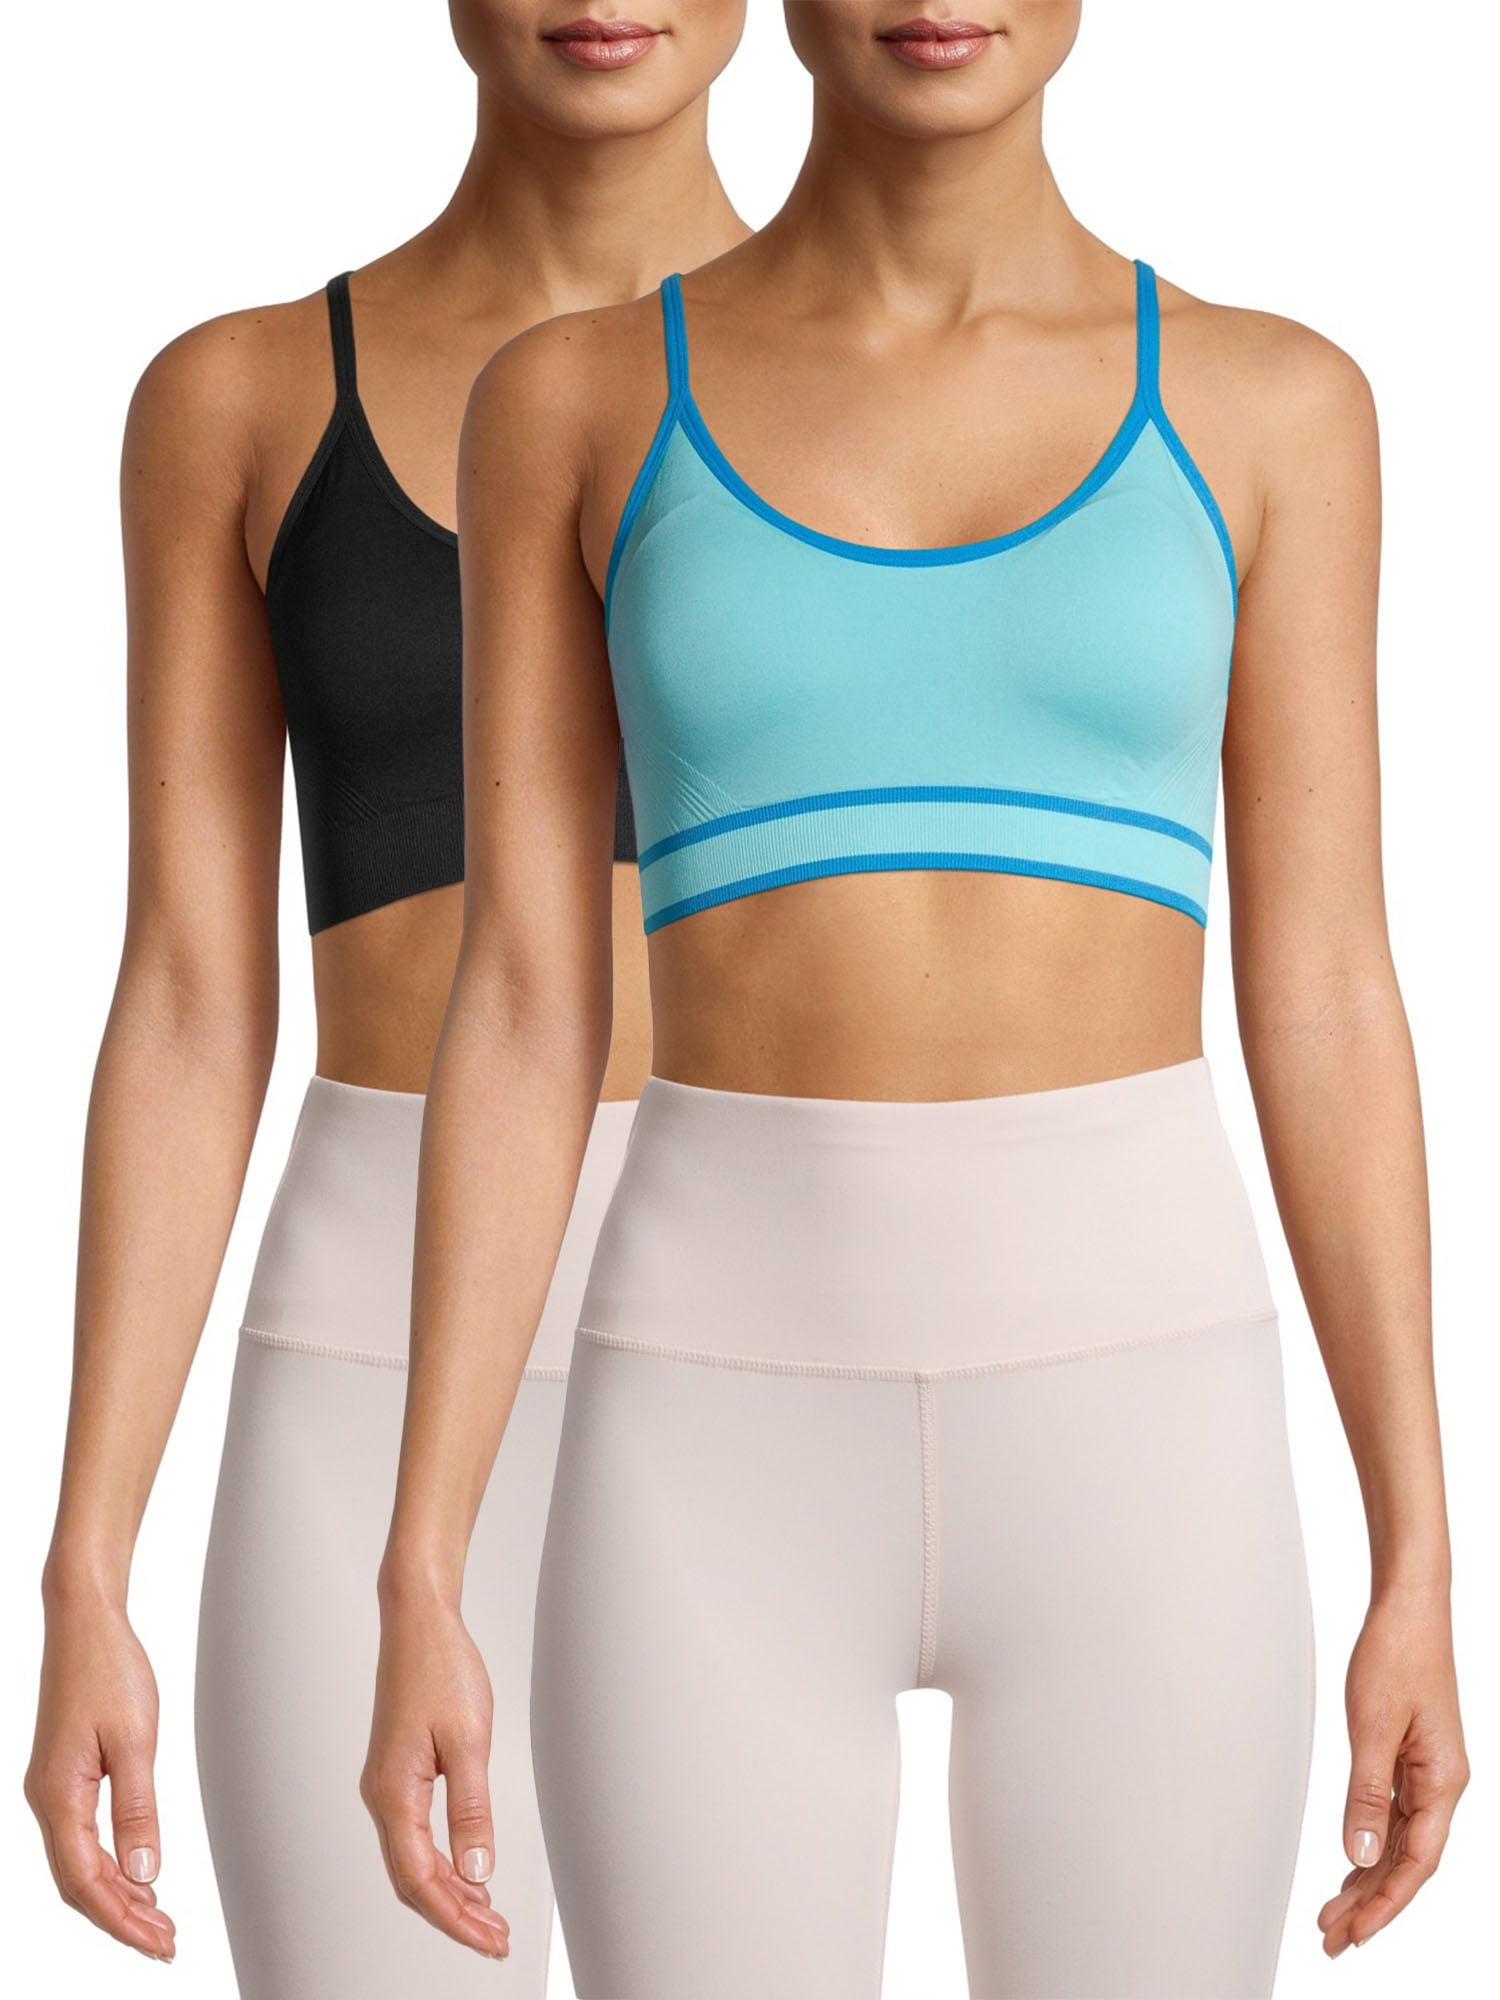 Avia Gray and Black Women's Low Support Seamless Cami Sports Bra Size L